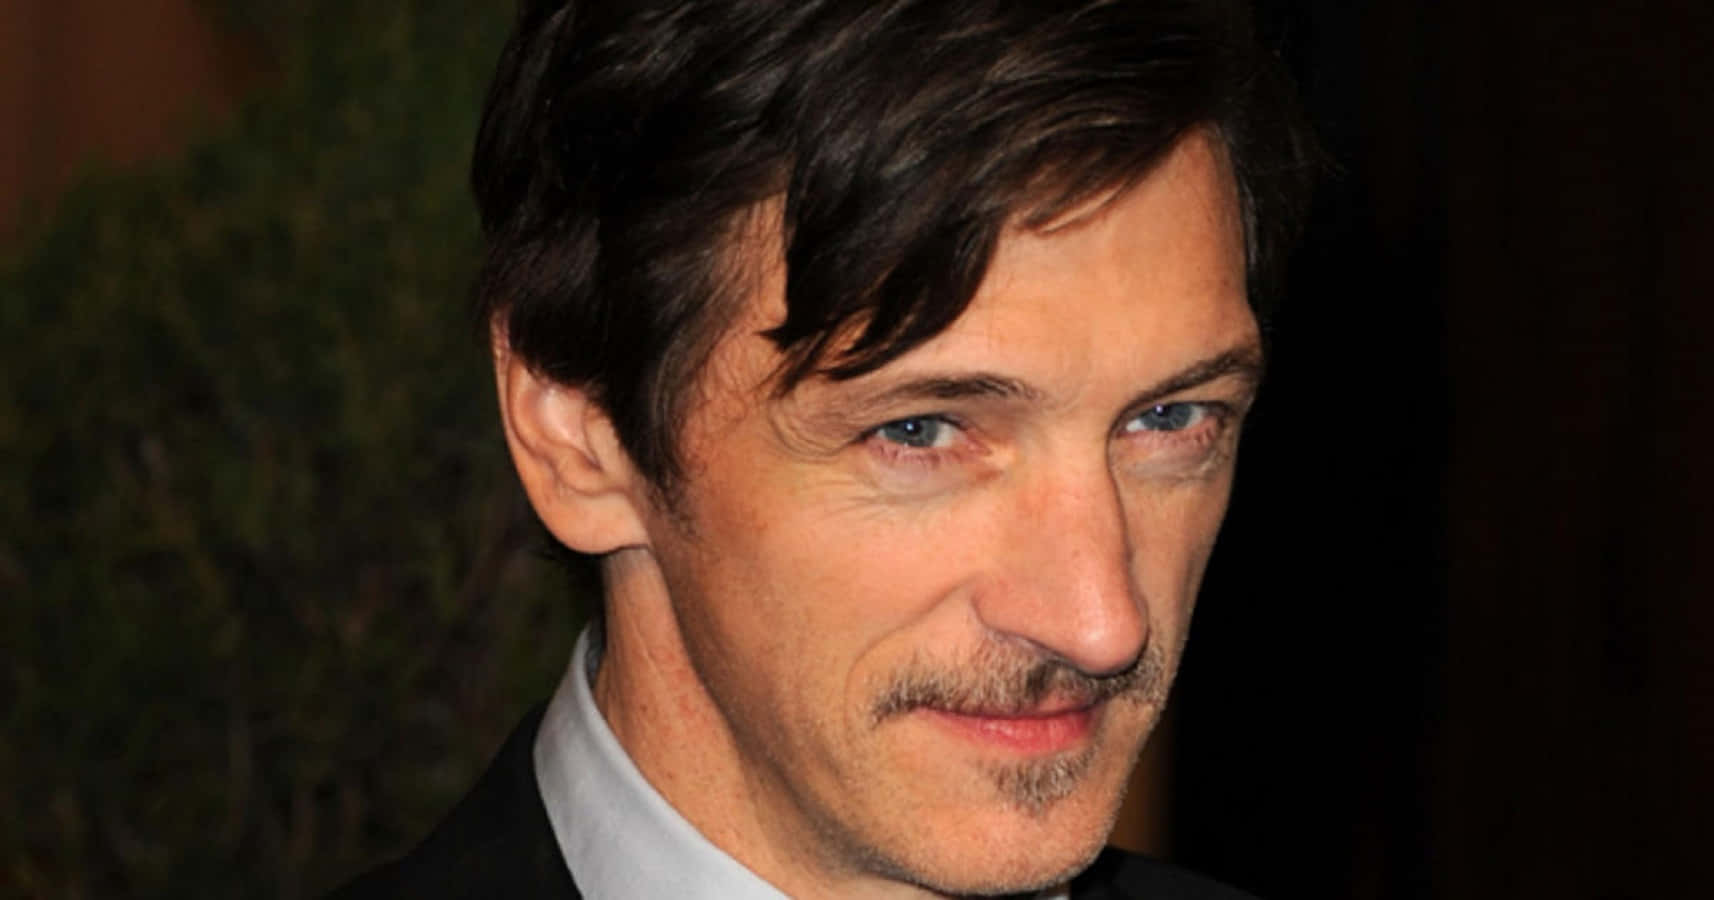 John Hawkes in a Thoughtful Pose Wallpaper